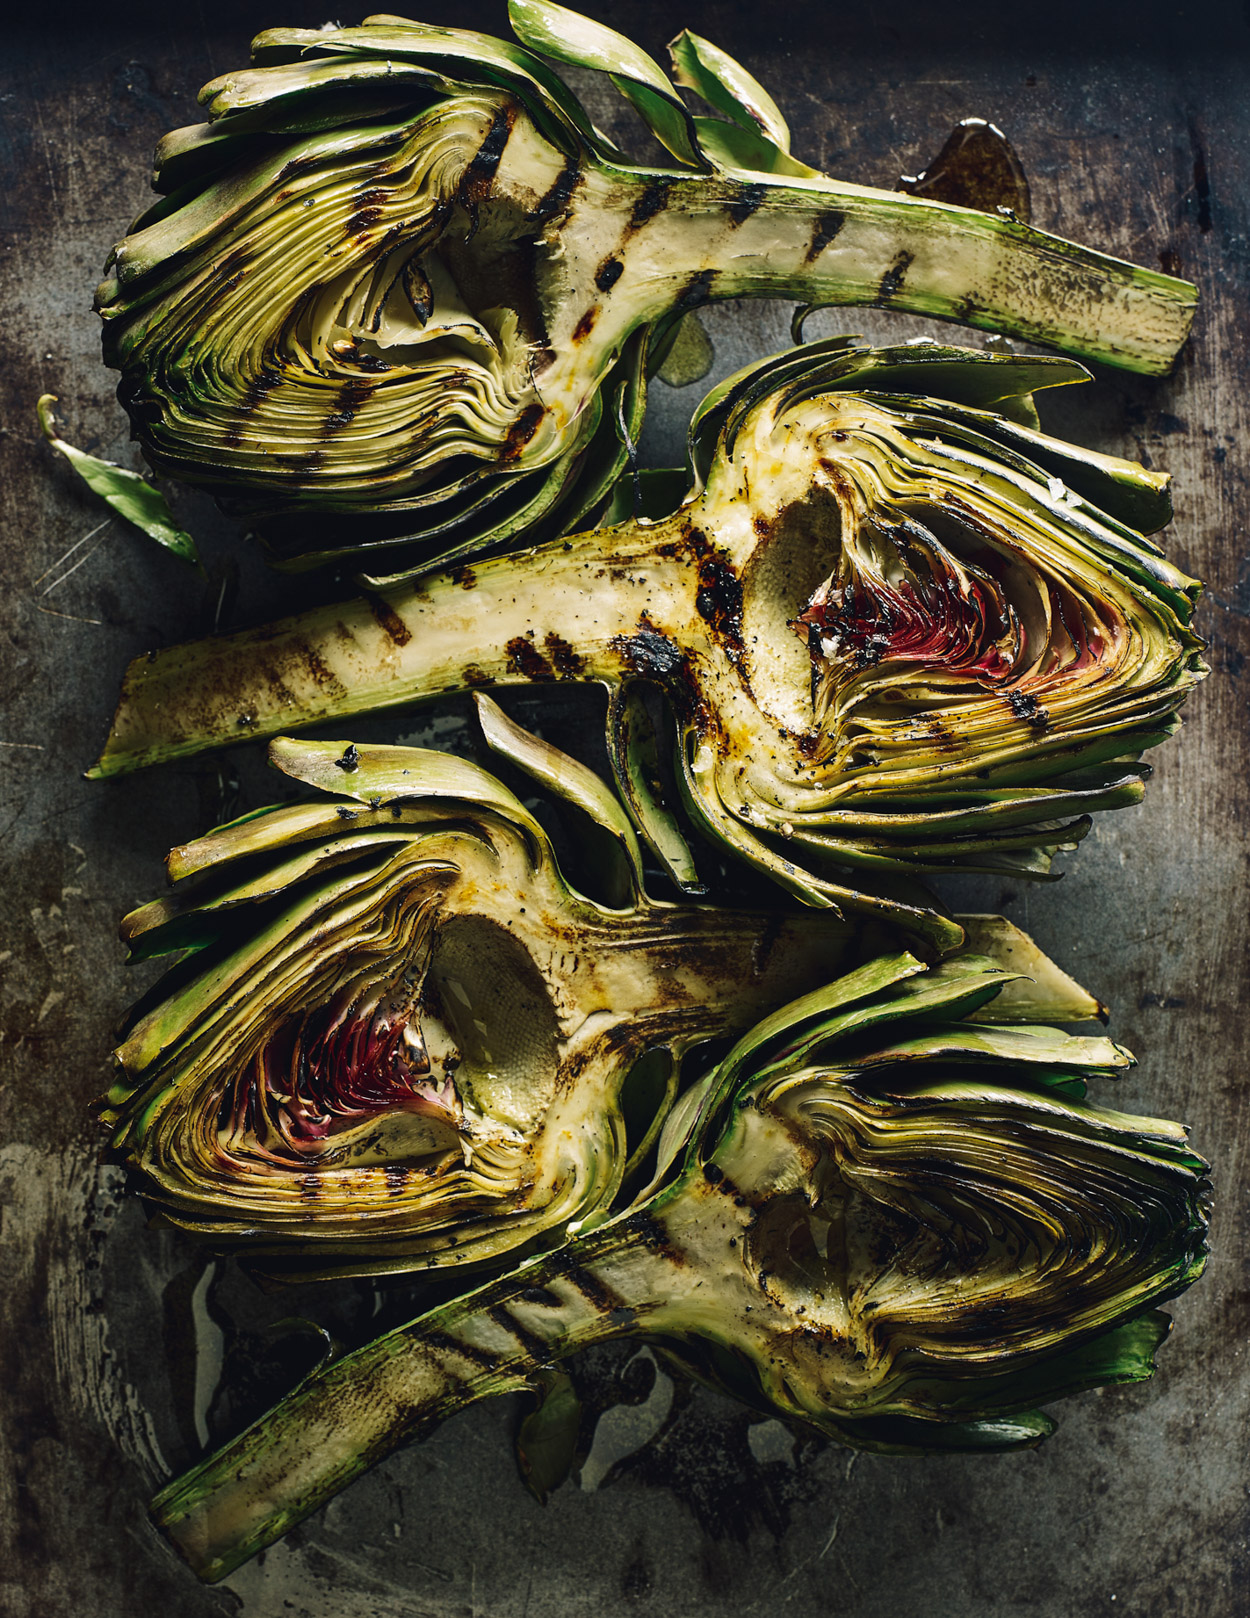 Los Angeles Food photographer - Cooking in Season  Cookbook Artichokes  by Ray Kachatorian